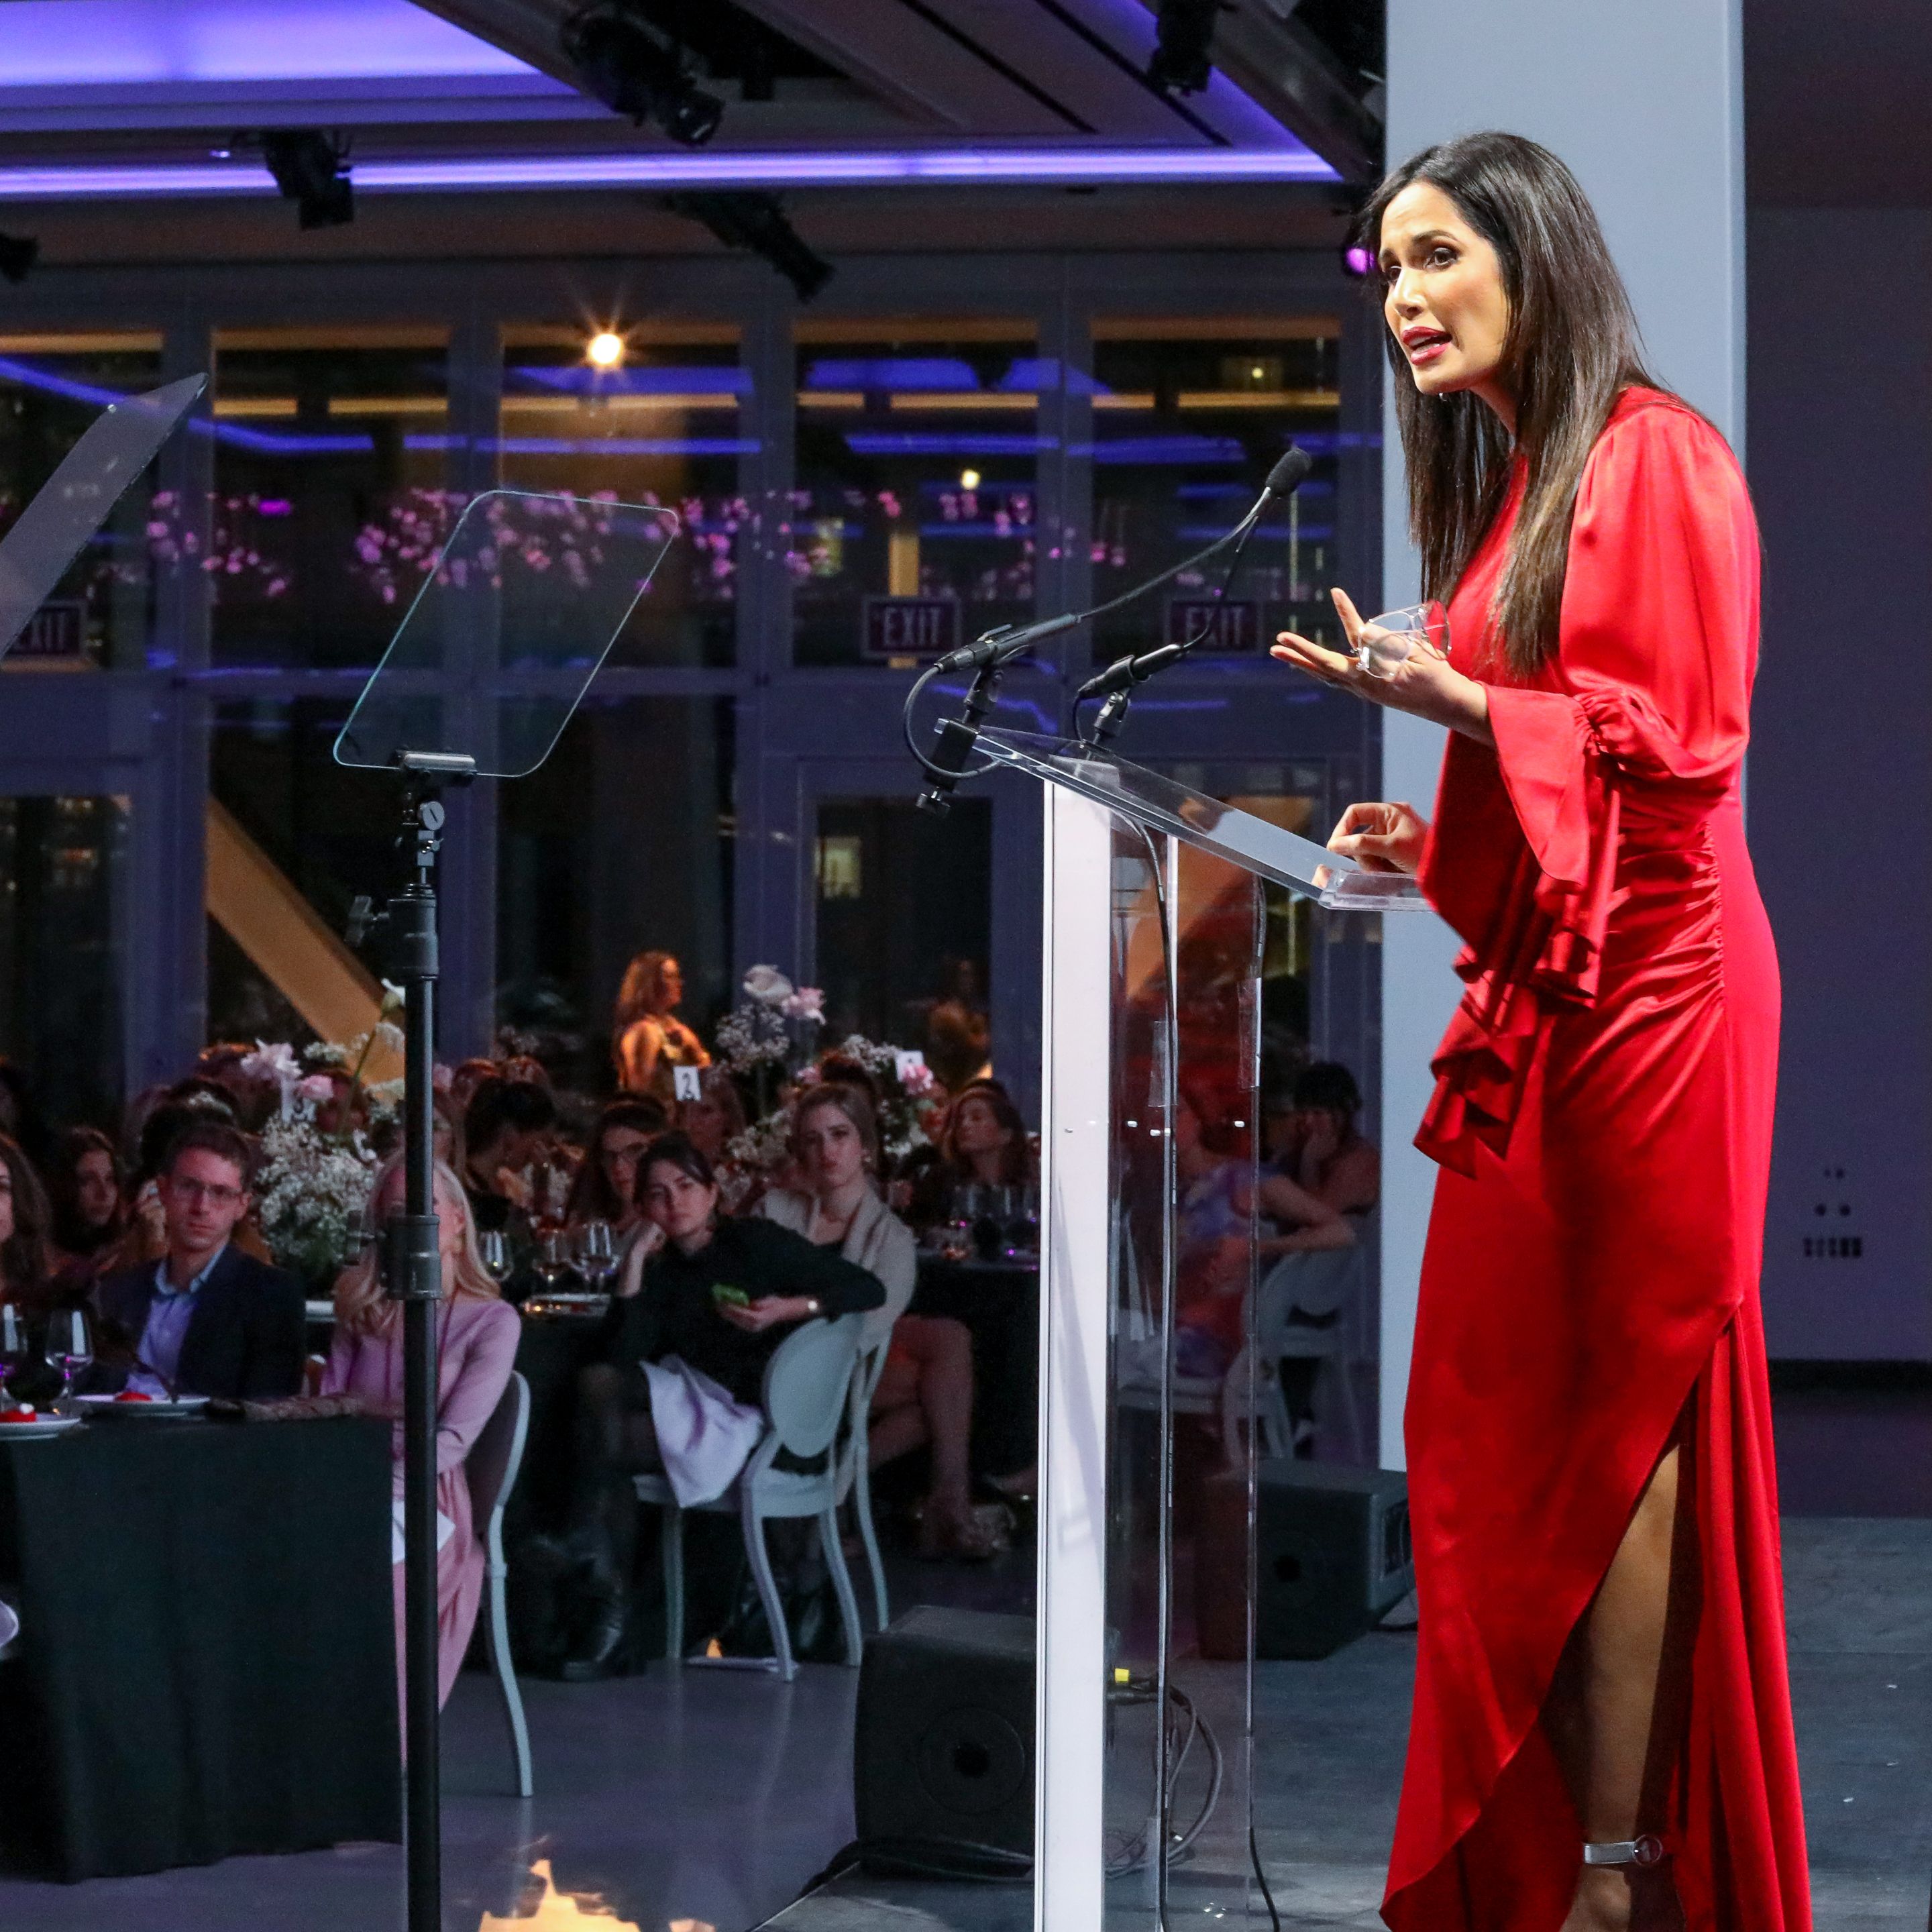 Padma Lakshmi: When I Was 14, I Helped My Mom Get an Abortion. It Changed Me Forever.